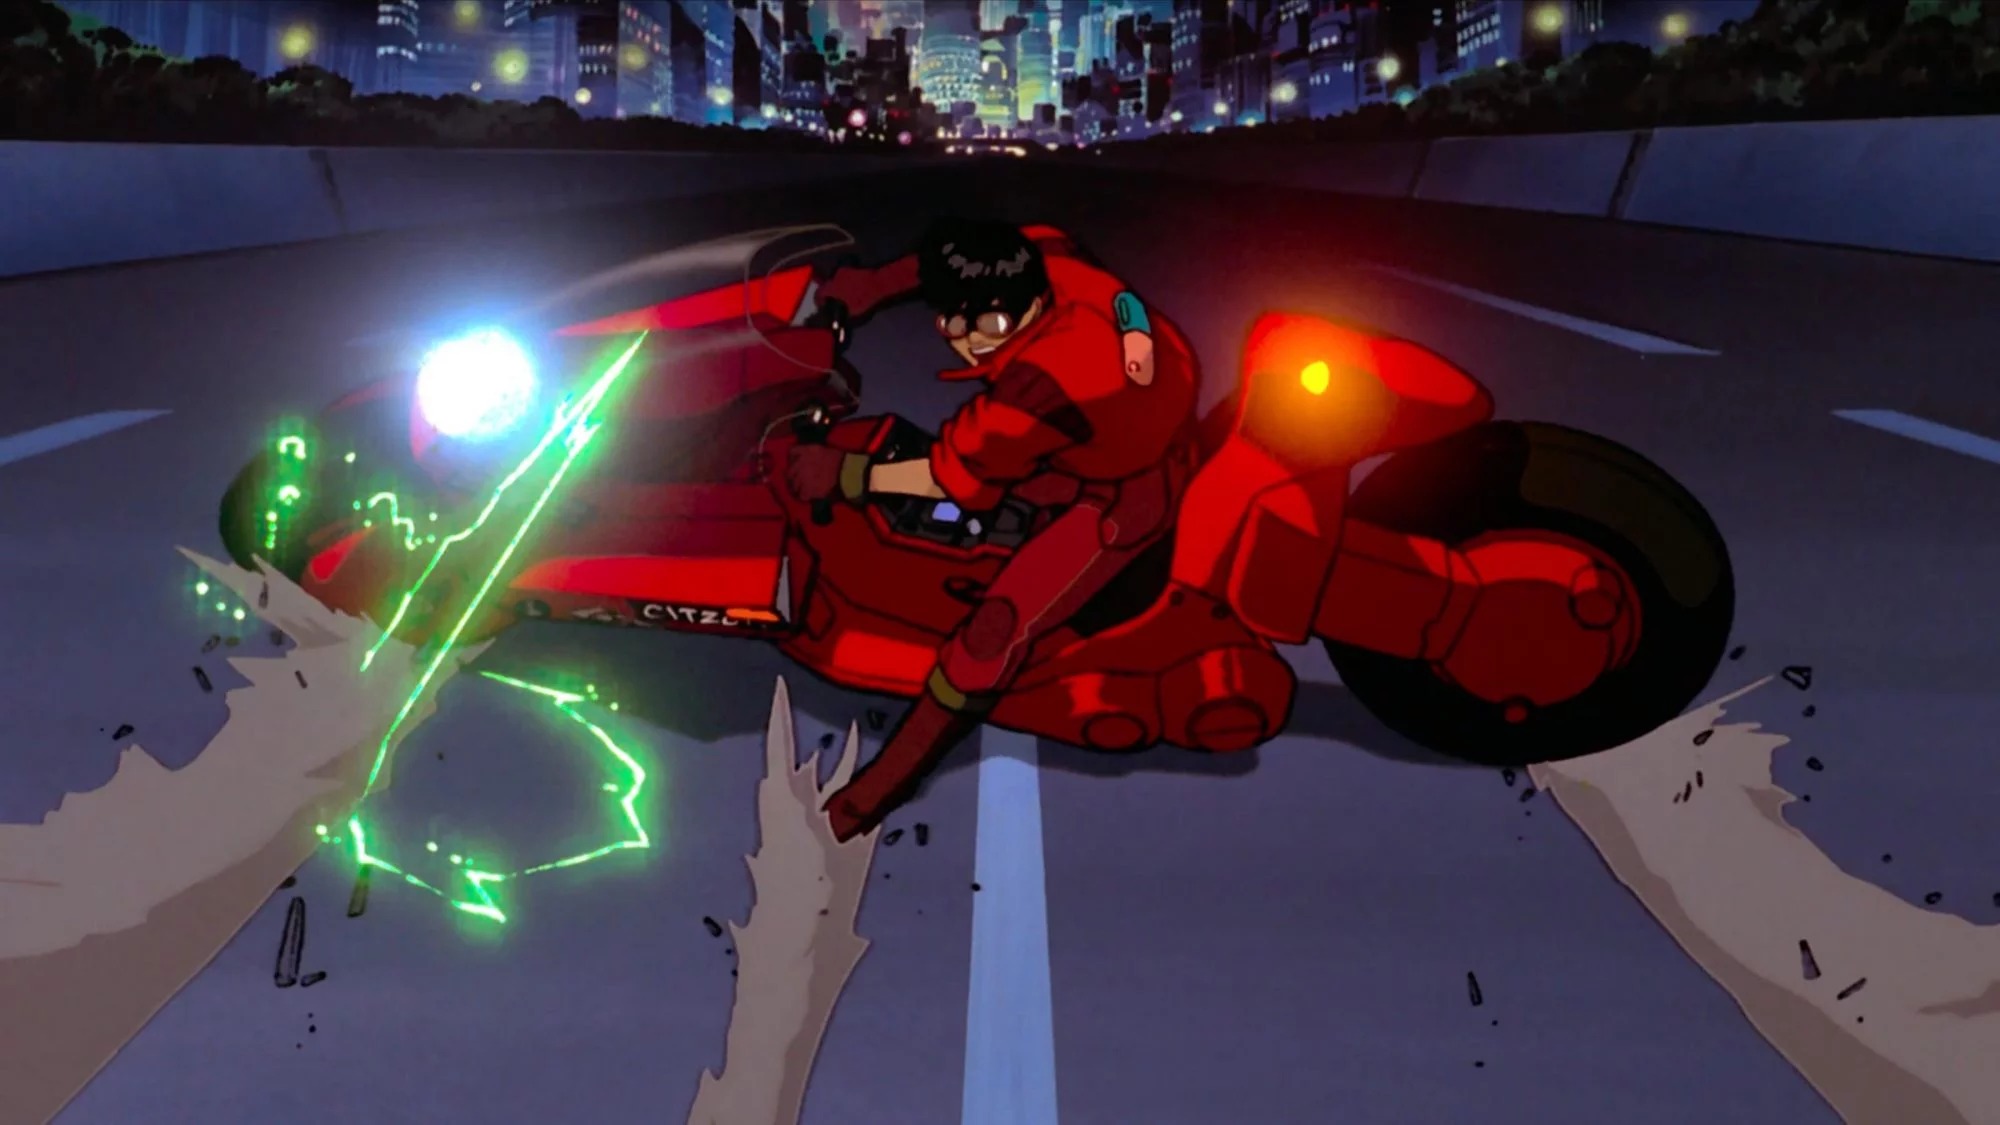 Jordan Peele on Why He’s Glad He Didn’t Direct Live-Action Akira